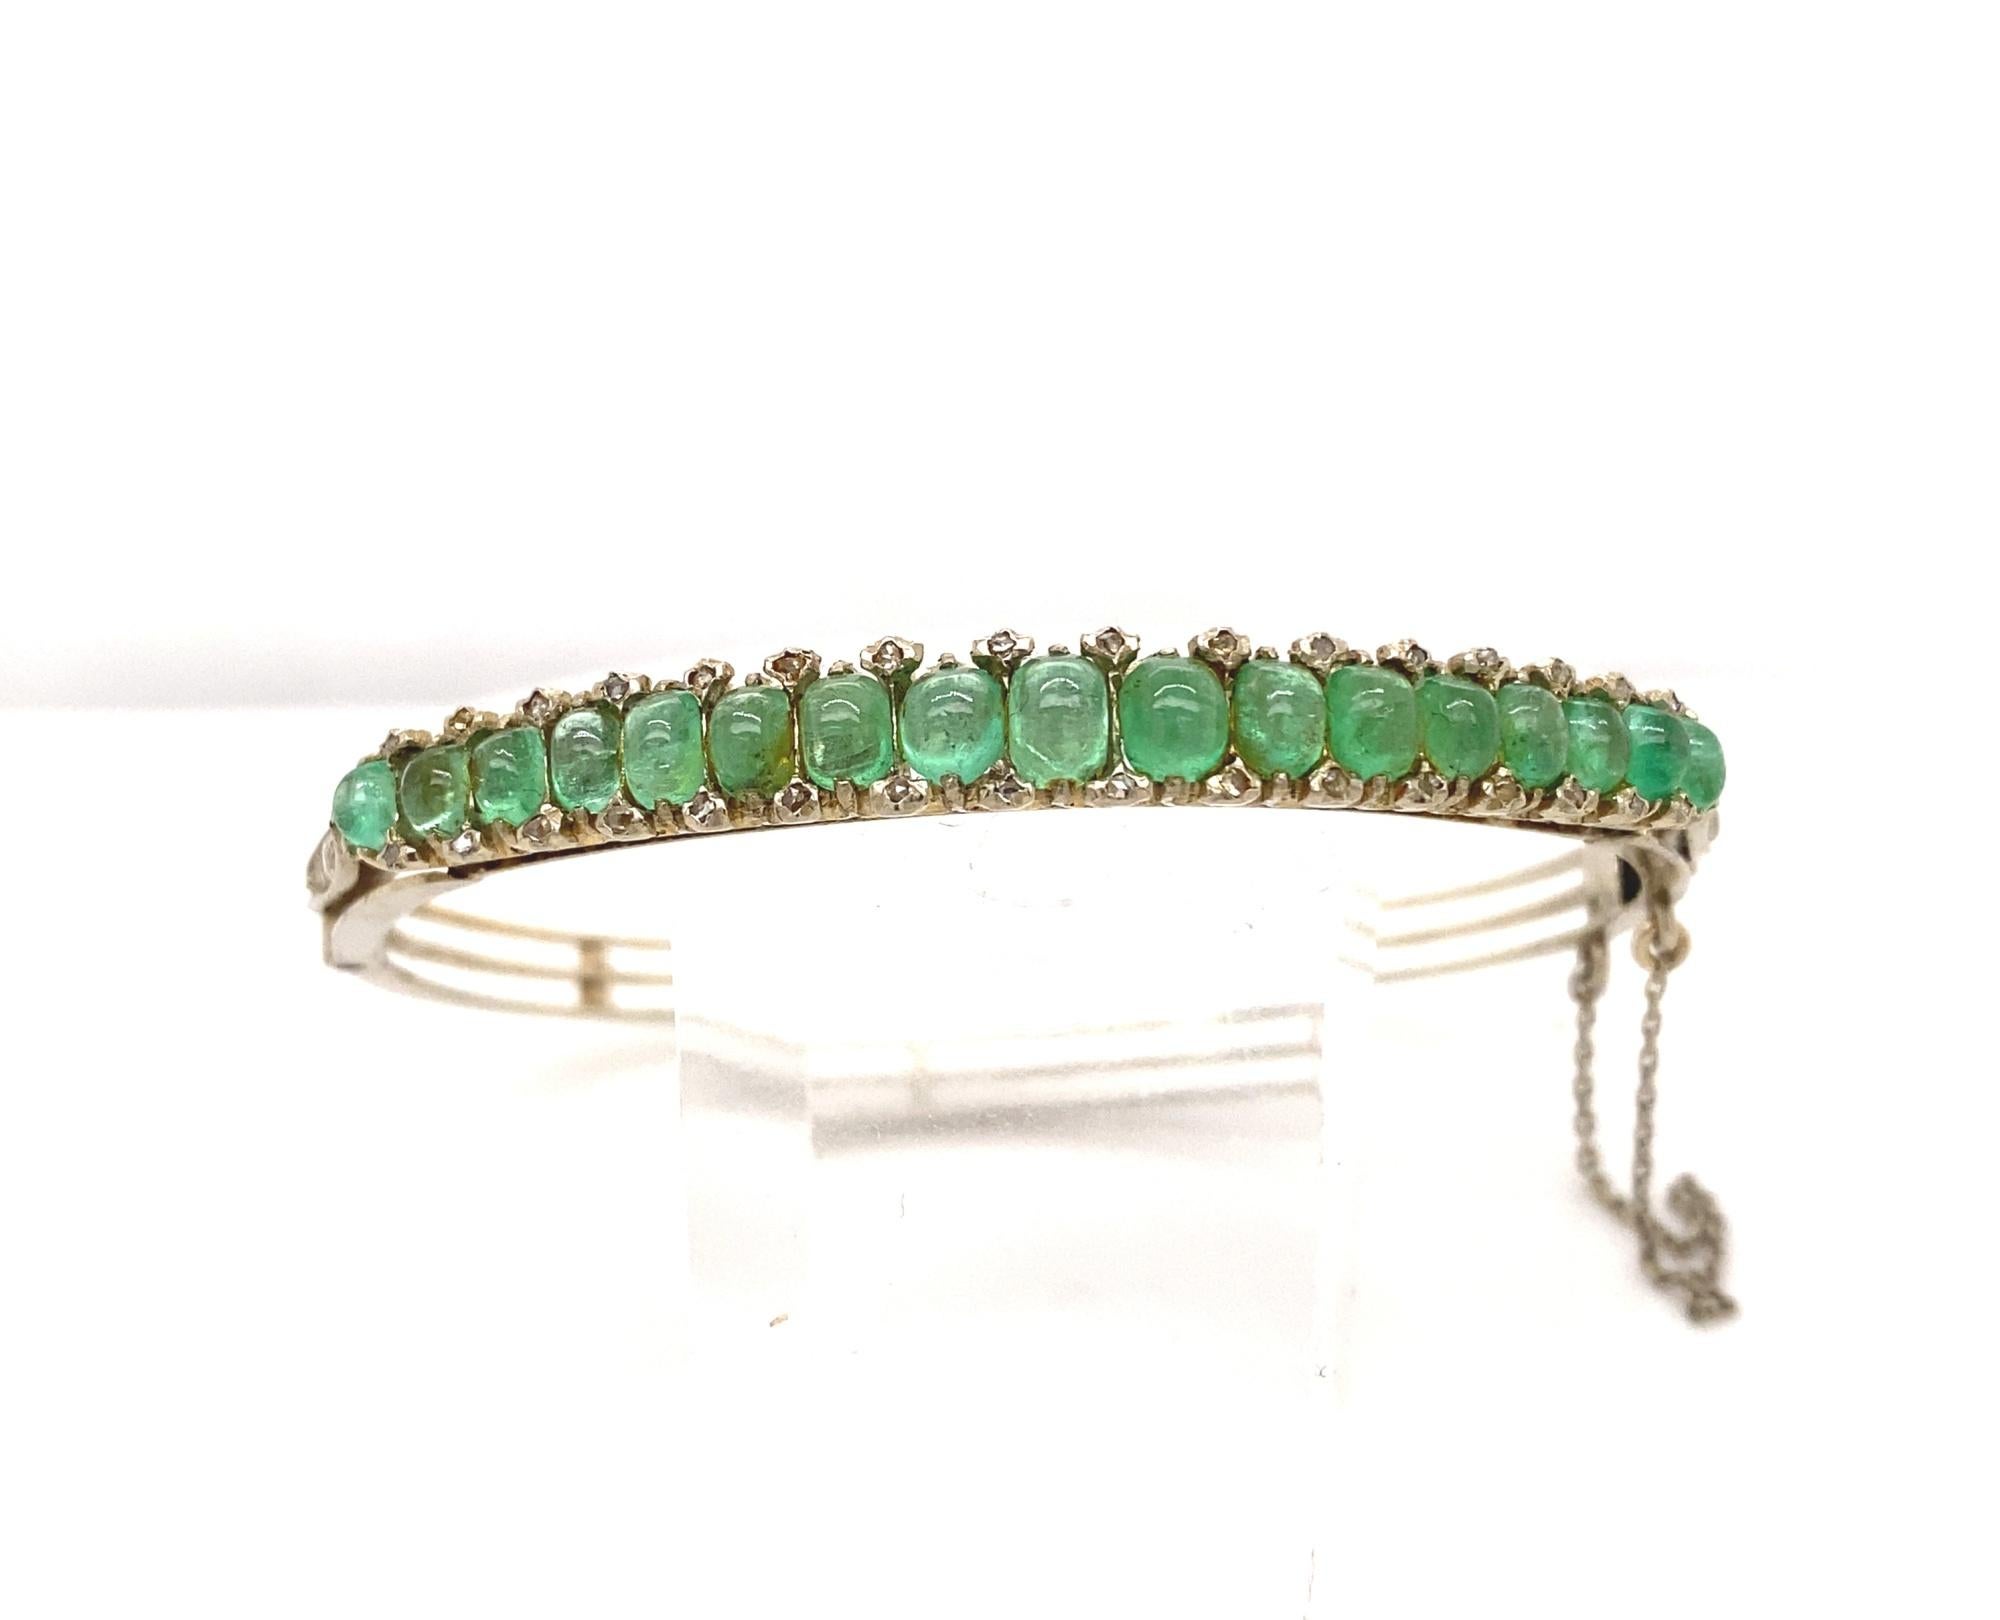 Original Art Deco Cabochon Emerald Diamonds 18K white Gold Bangle. This is a beautiful and rare original cabochon emerald rose cut diamond and 18k white gold bangle bracelet. The bracelet is set with 17 light green natural cabochon emeralds the